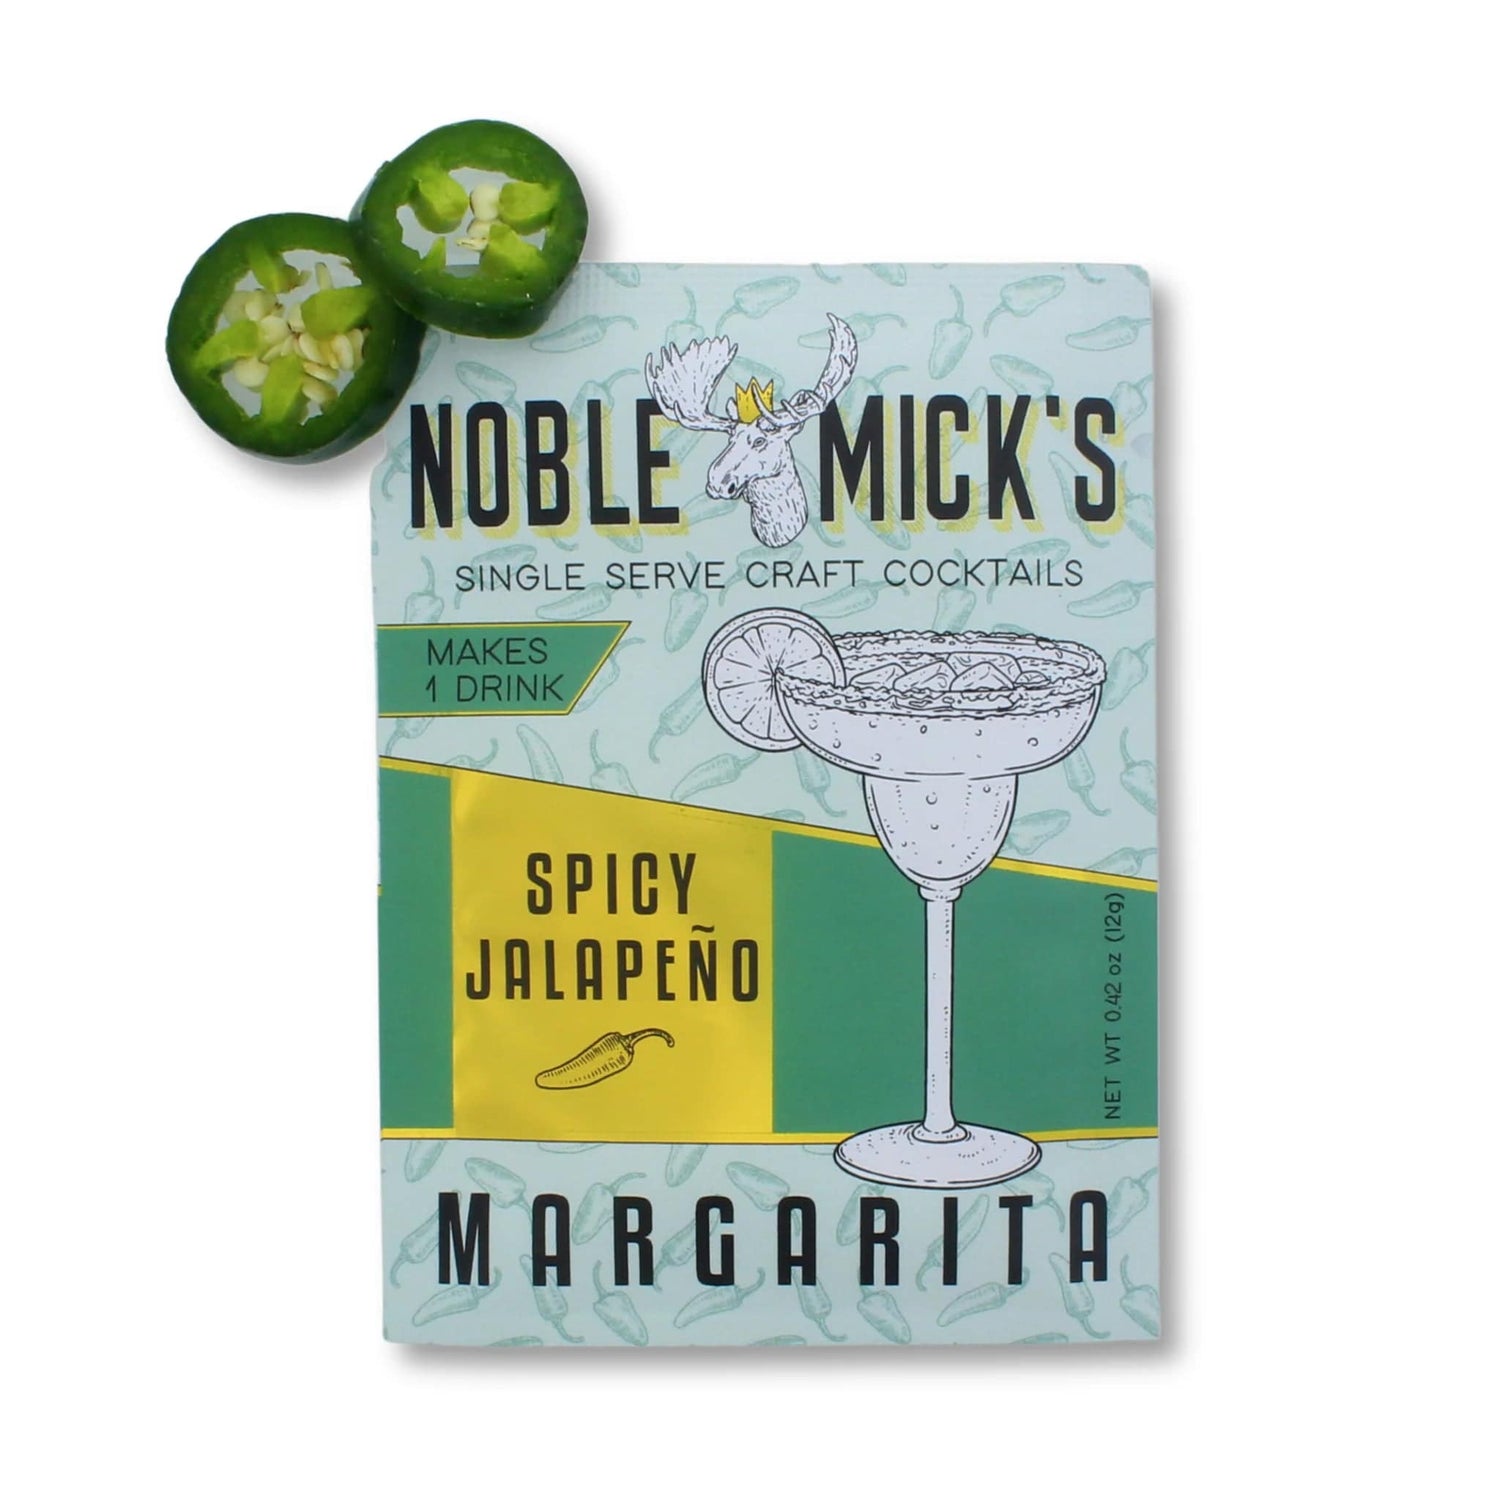 Noble Mick's - SPICY JALAPENO MARGARITA - SINGLE SERVE CRAFT COCKTAIL MIX - Findlay Rowe Designs